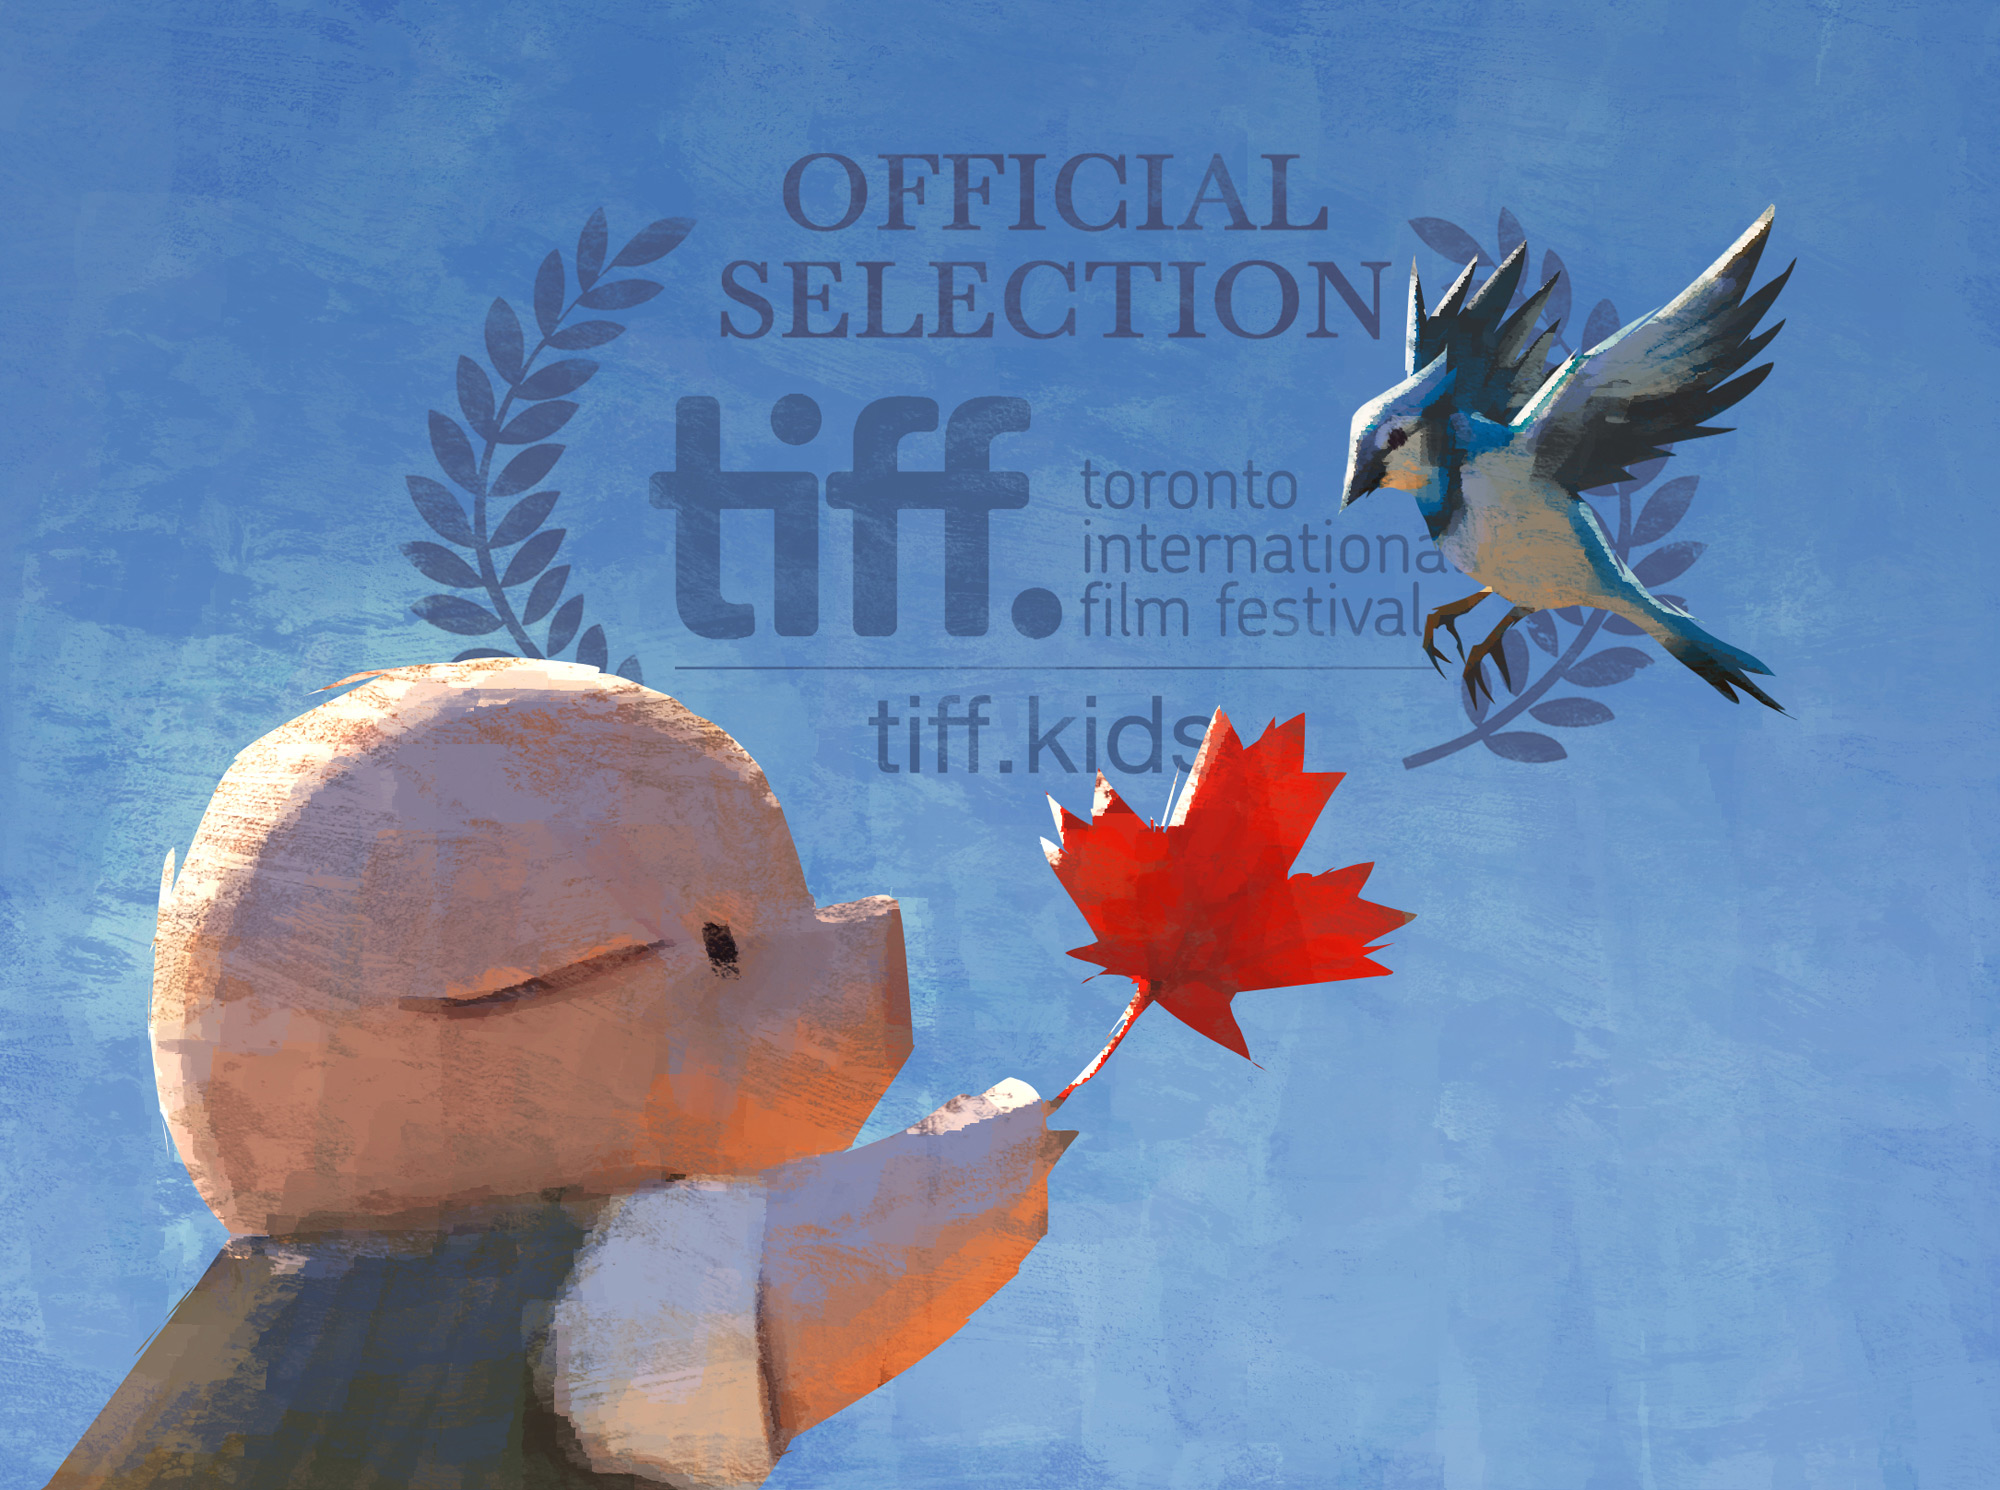 The Dam Keeper - An Animated Film from Robert Kondo and Dice Tsutsumi